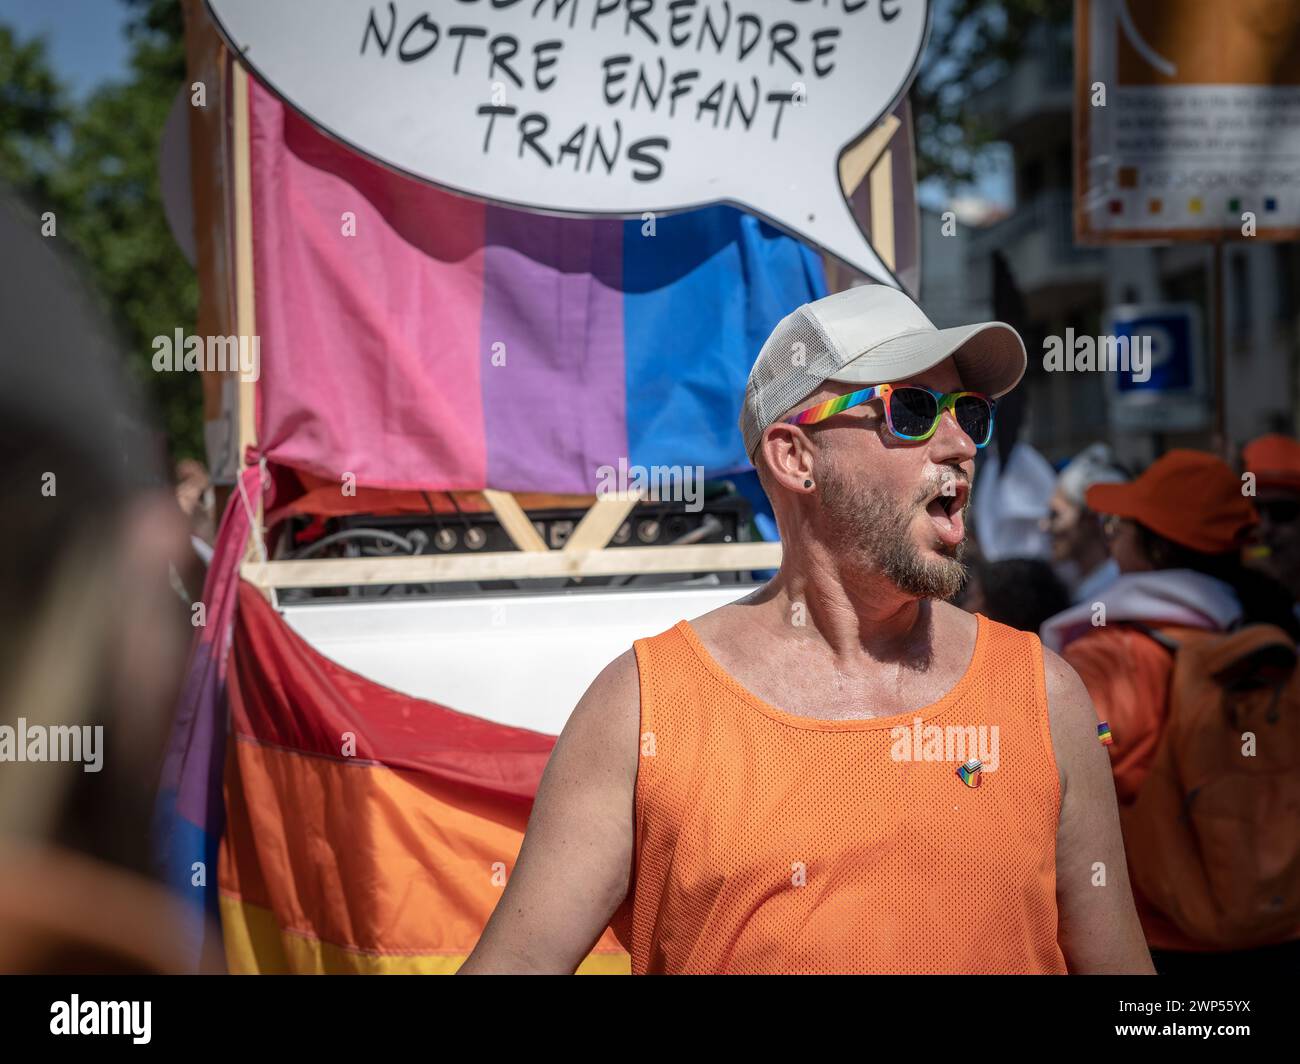 Paris, France - June 24, 2023: A man shouting underneath poster in French at the 2023 Paris gay pride on which it says something about a trans child Stock Photo